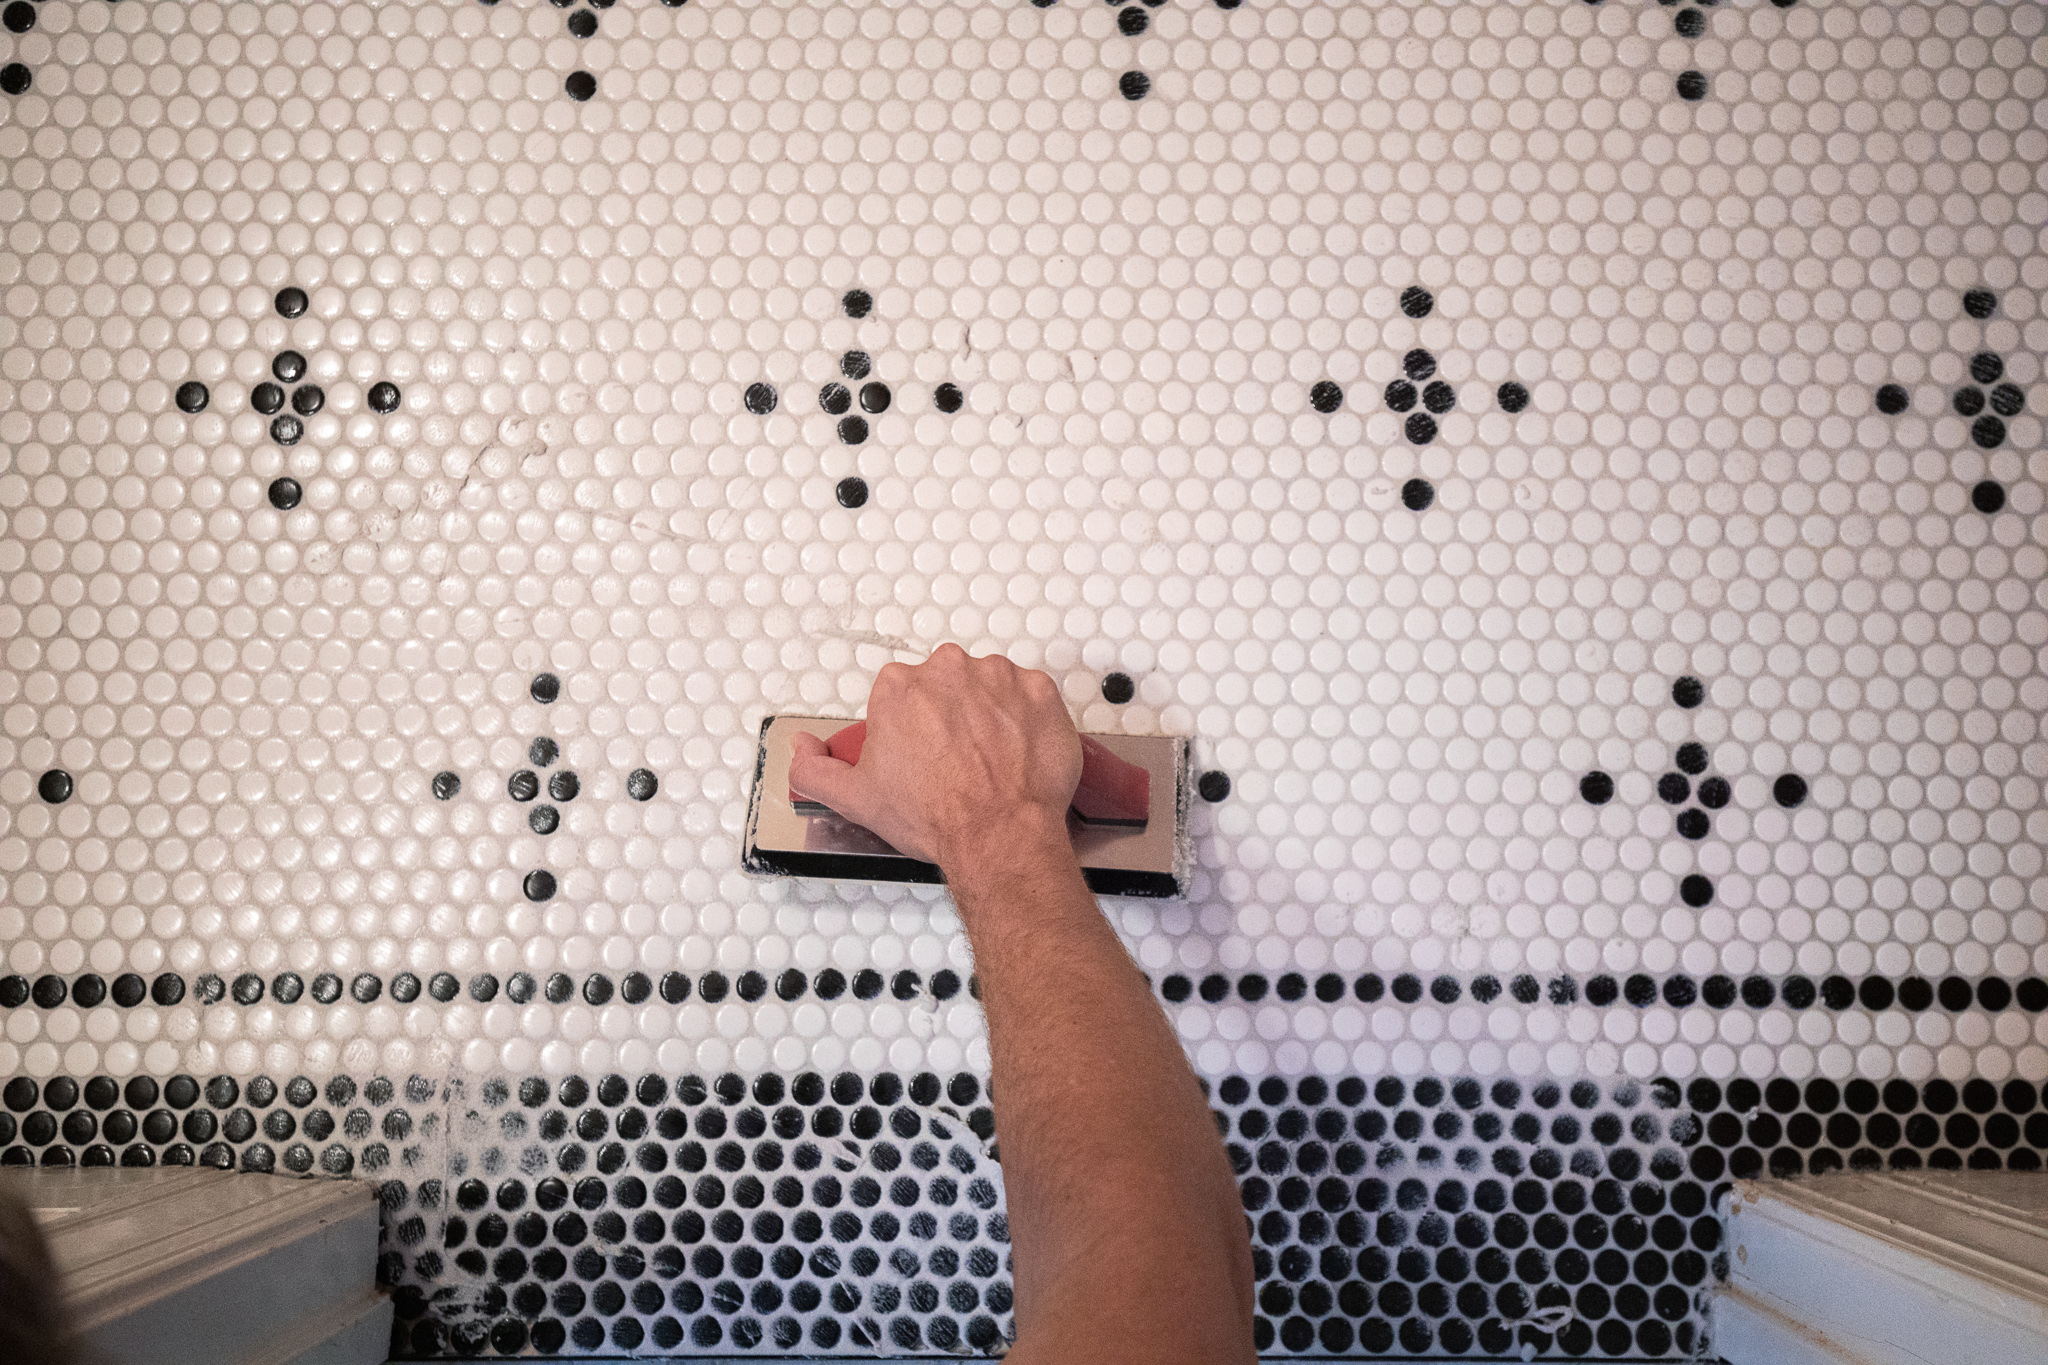 Diy Your Own Penny Tile Patterned Floor